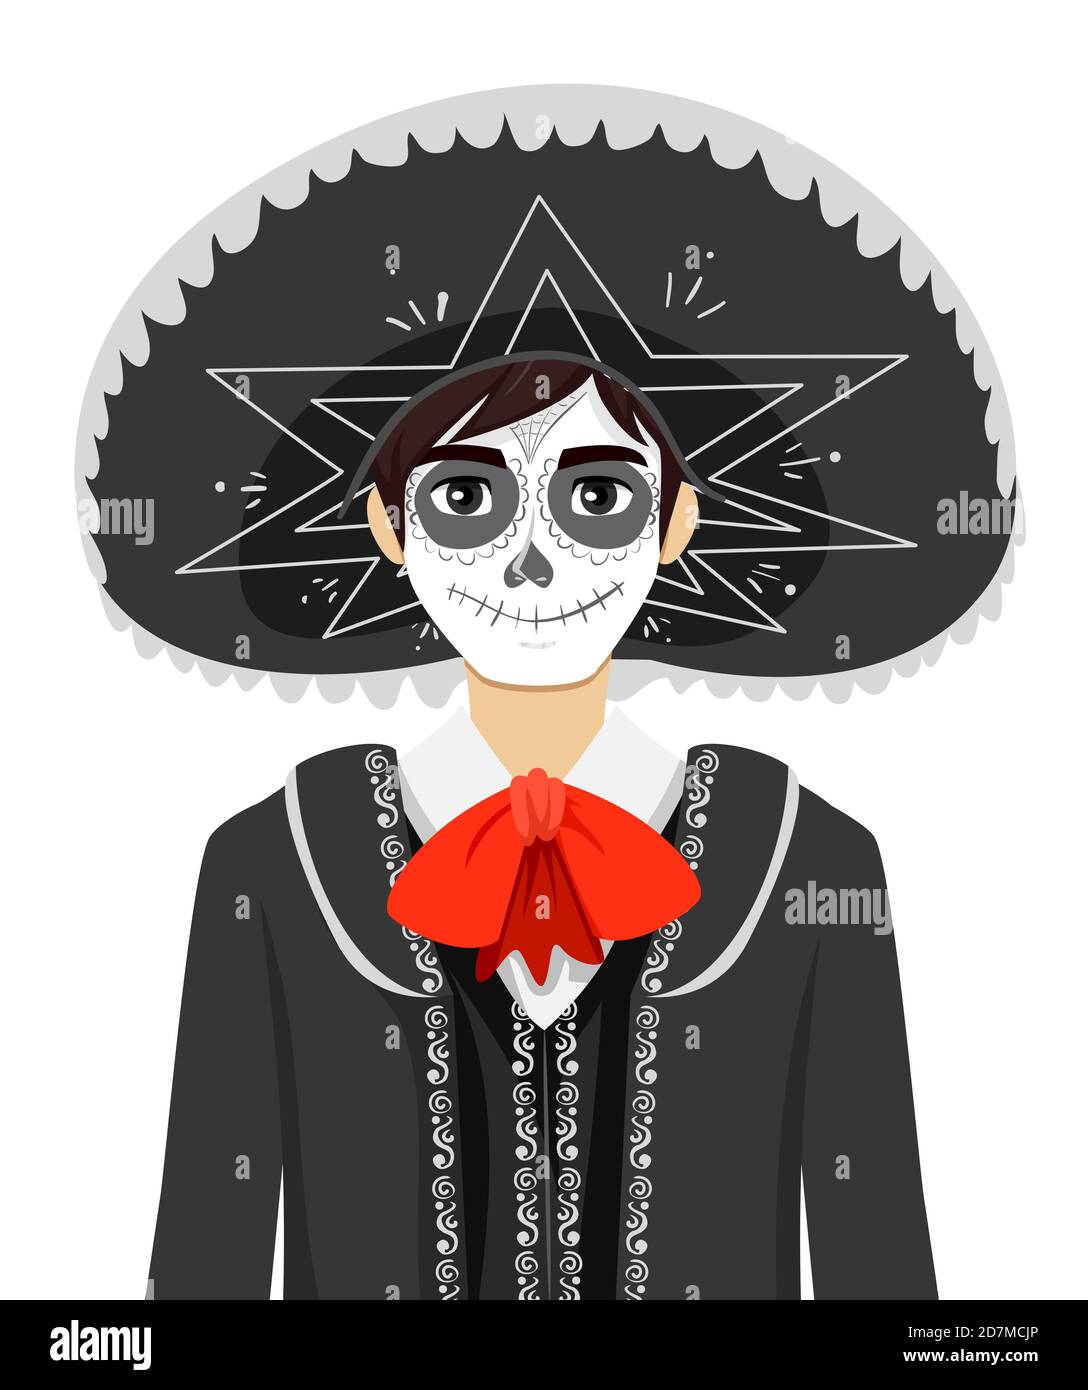 Illustration of a Teenage Guy Wearing Sugar Skull Costume with Black Suit, Red Ribbon and Mexican Hat Stock Photo